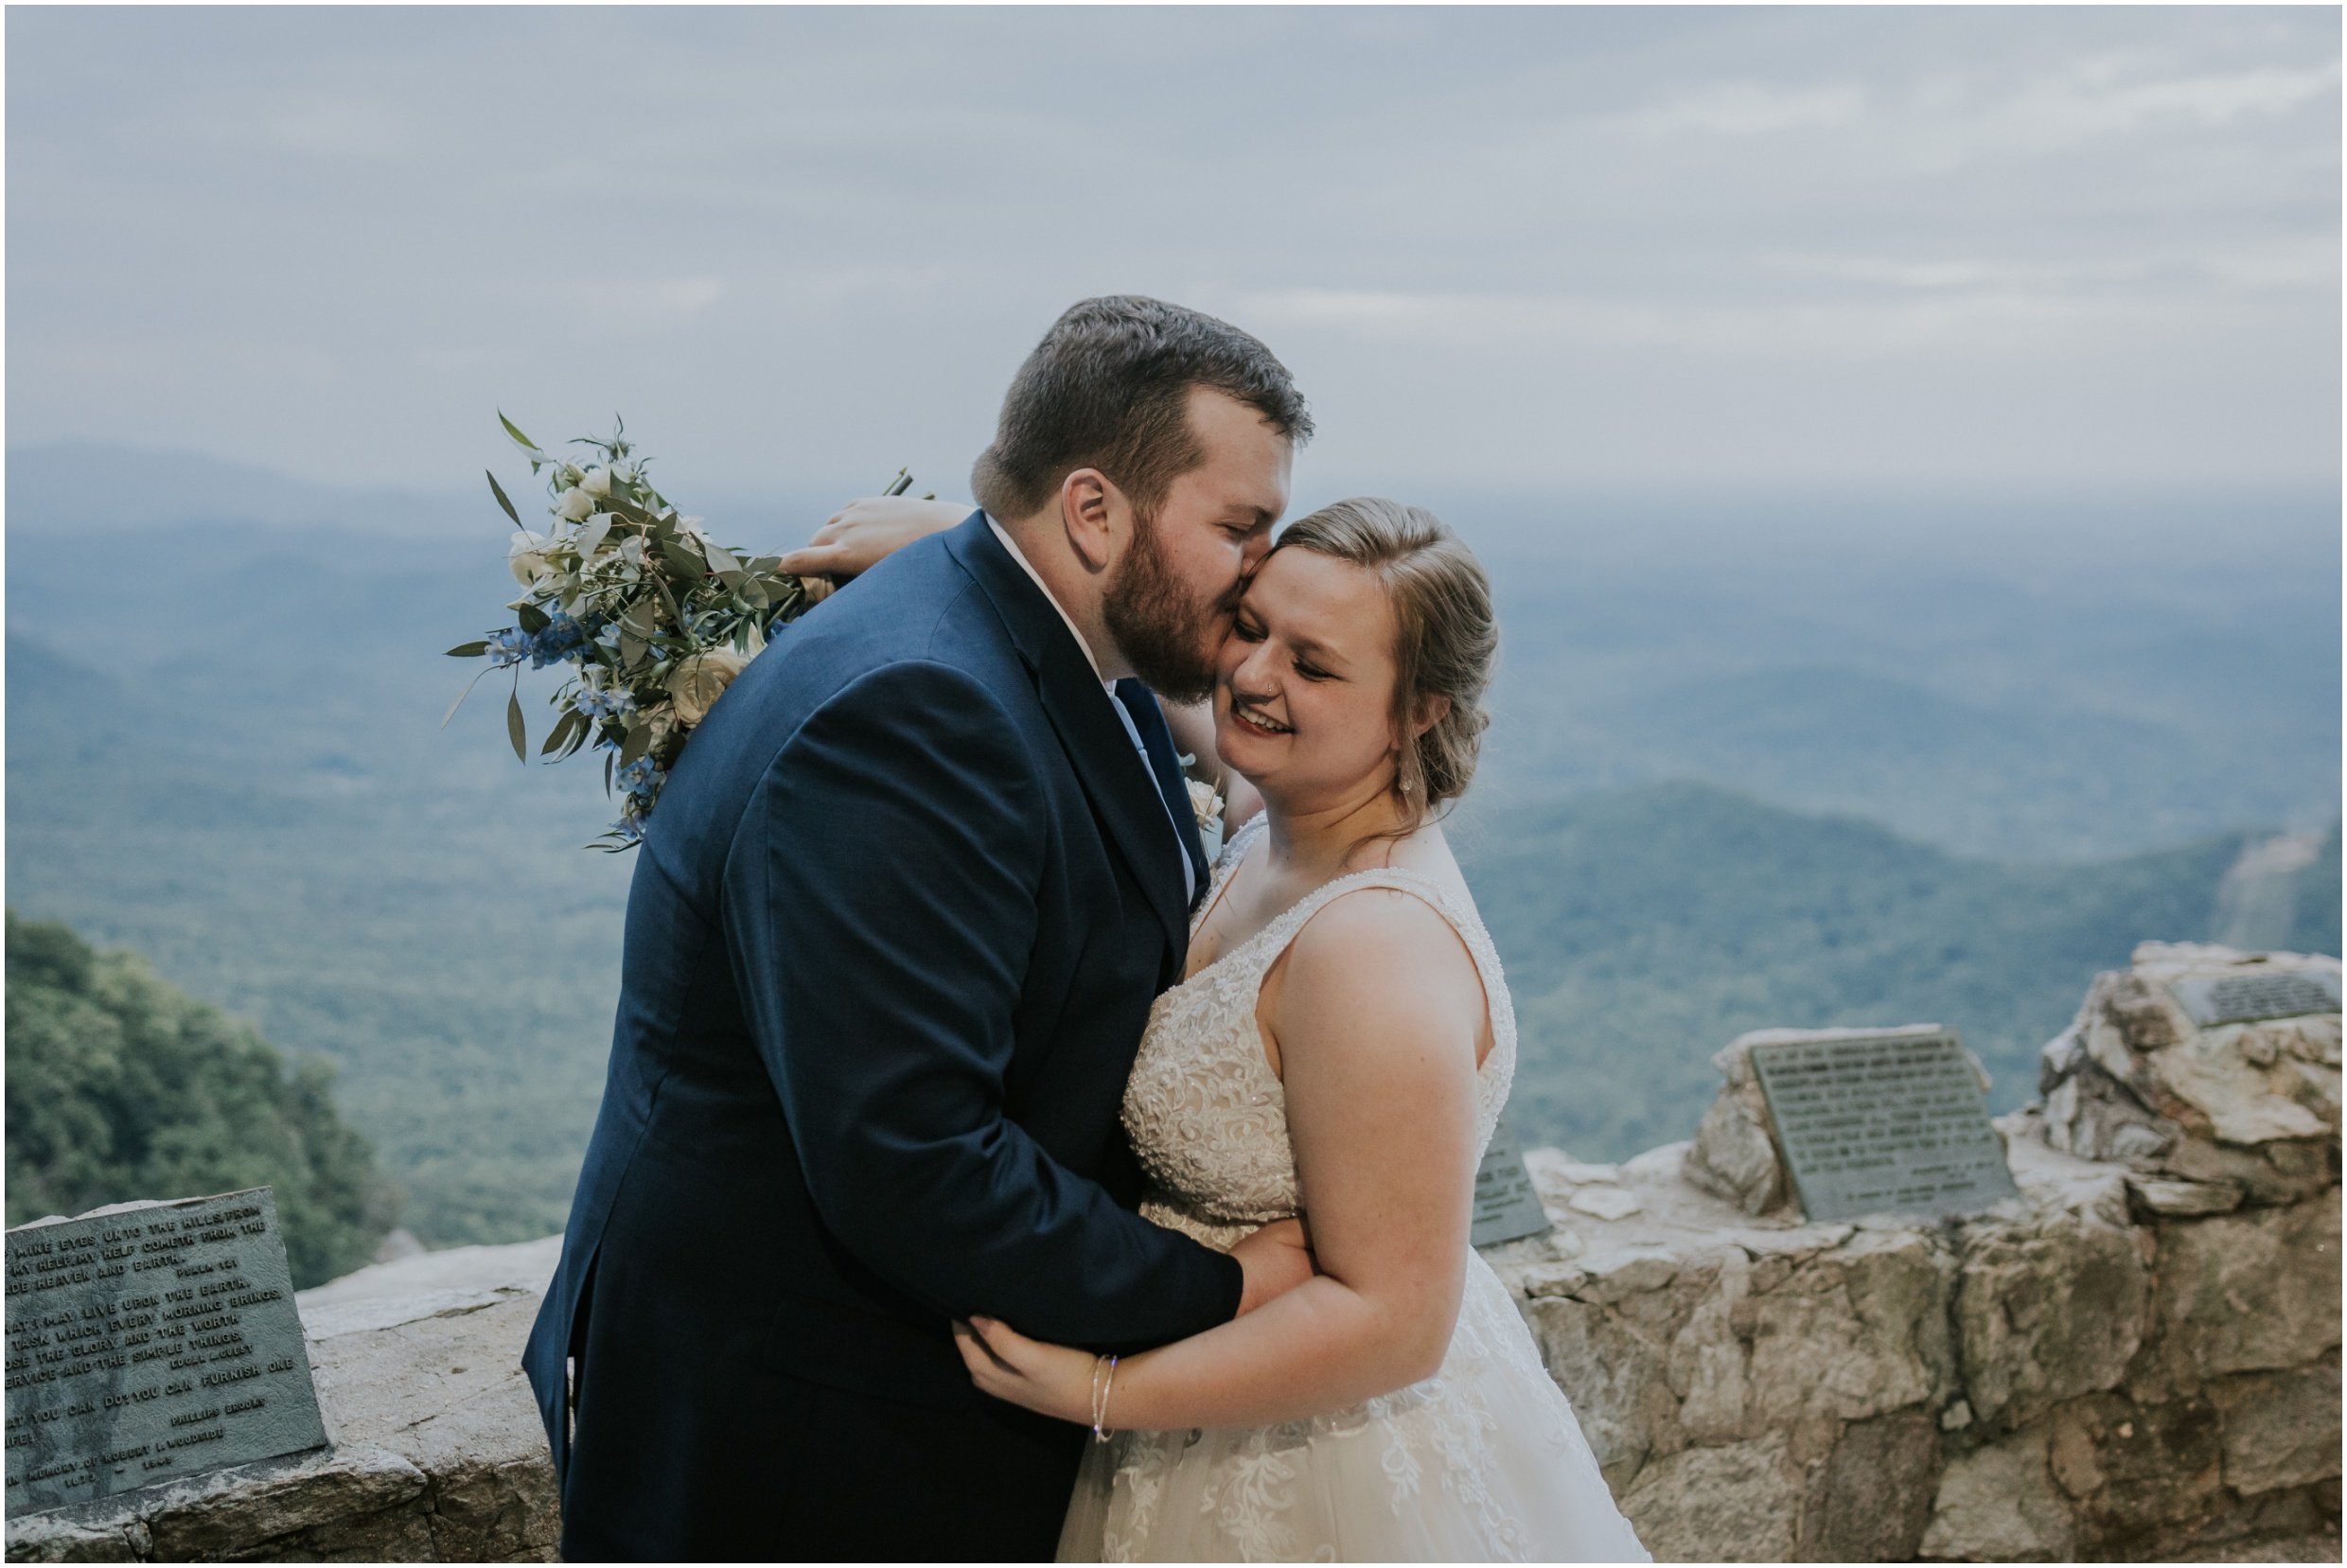 the-pretty-place-fred-symmes-chapel-greenville-sc-brevard-nc-camp-mountain-wedding-south-carolina-tennessee-katy-sergent-photography_0022.jpg